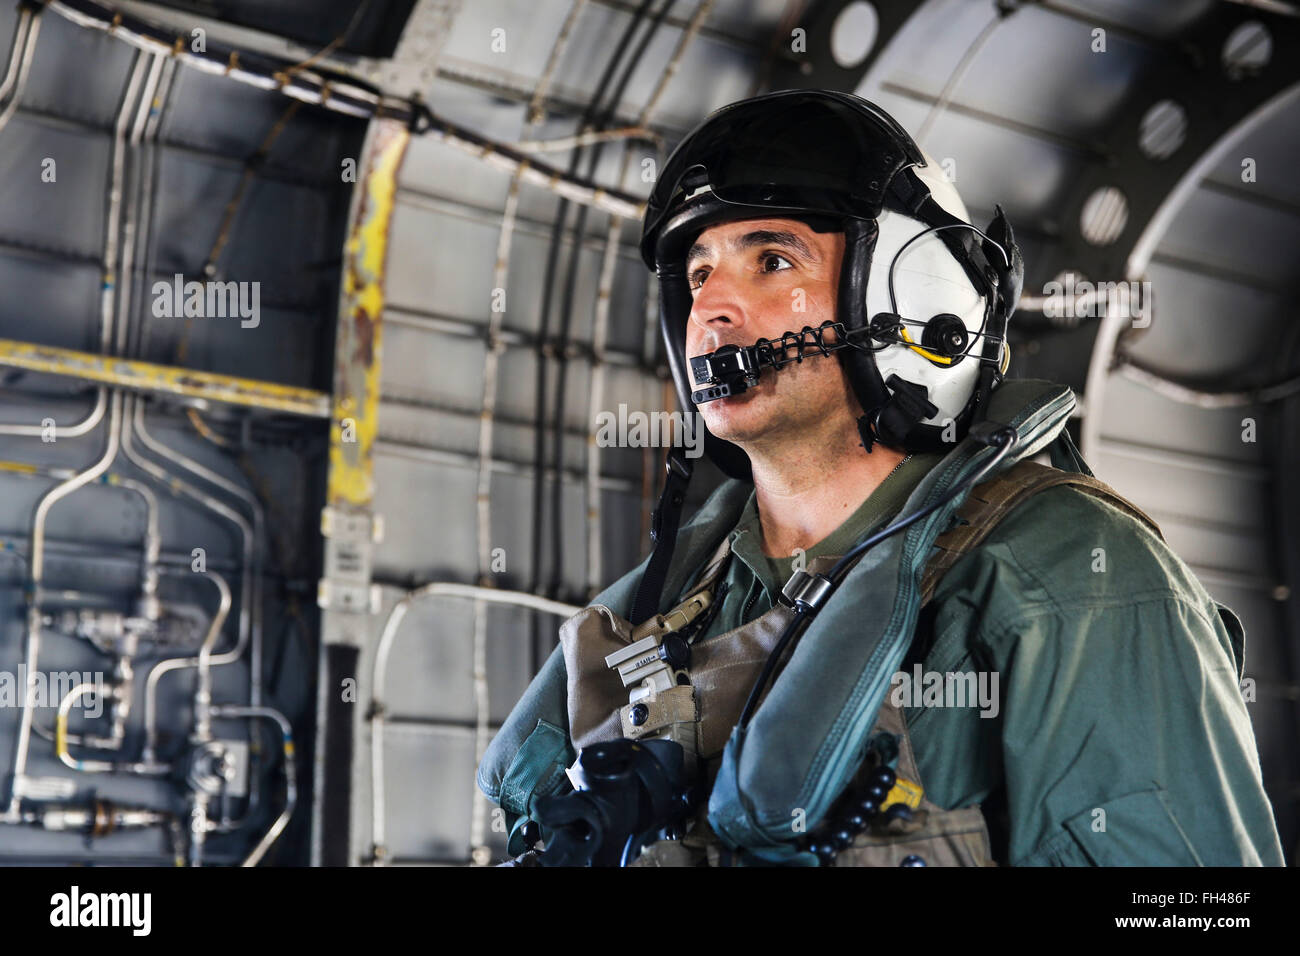 Sgt. Maj. Richard Charron, sergeant major of Marine Corps Air Station Miramar, Calif., goes on his final flight in a CH-53E Super Stallion with Marine Heavy Helicopter Squadron (HMH) 361, Feb. 22. Charron will retire March 2 after 30 years of service. Stock Photo